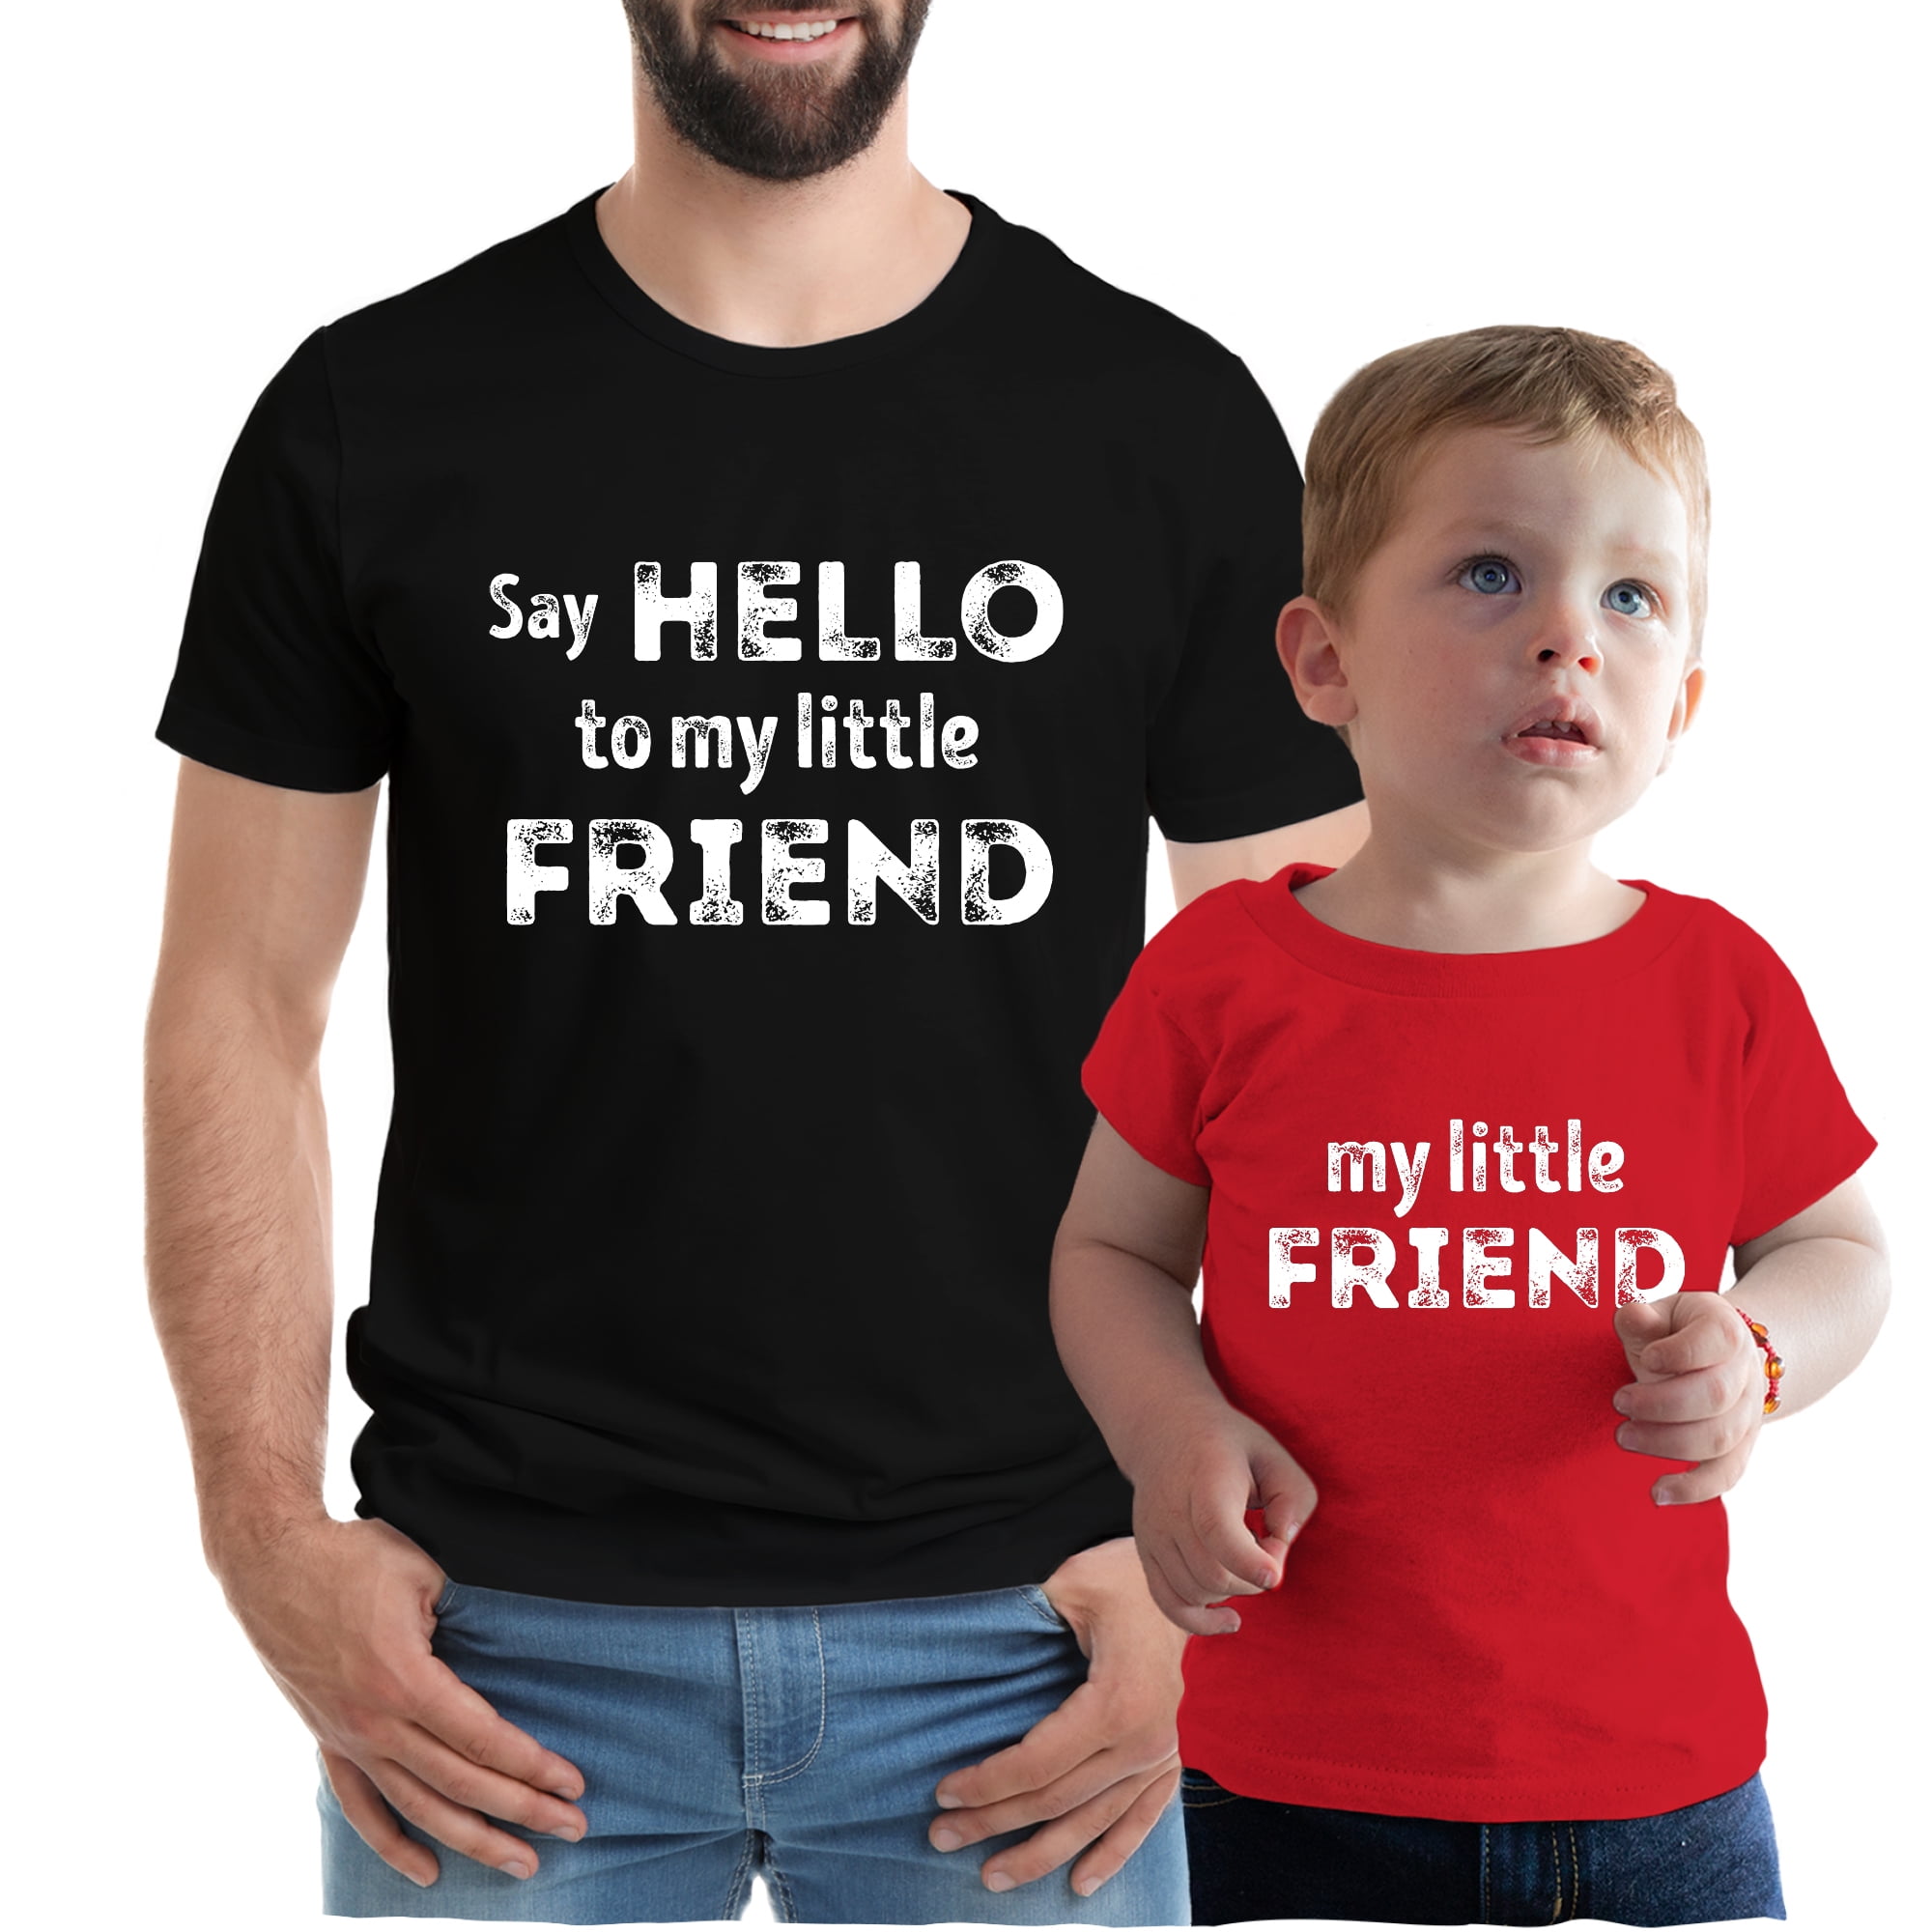 Texas Tees, Daddy and Son Matching Clothes, Father Son Shirt, Red Little  Friend & Say Hello 